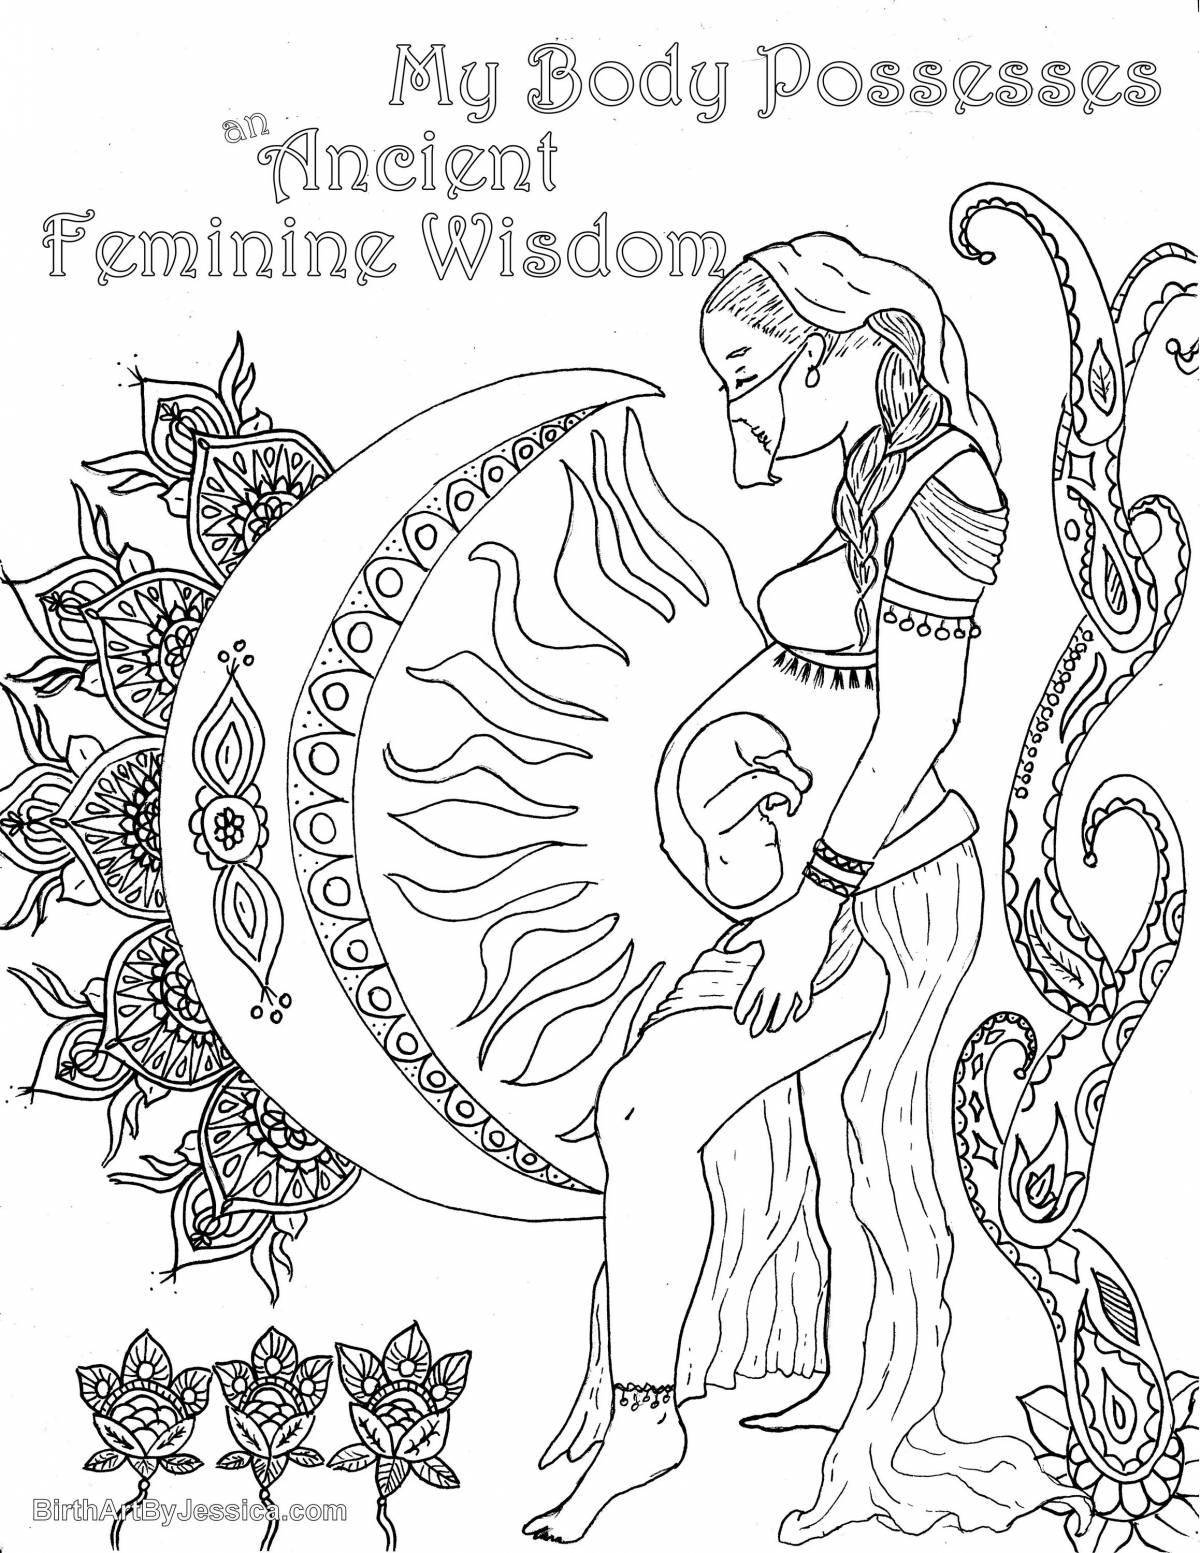 Exciting coloring book for expectant mothers